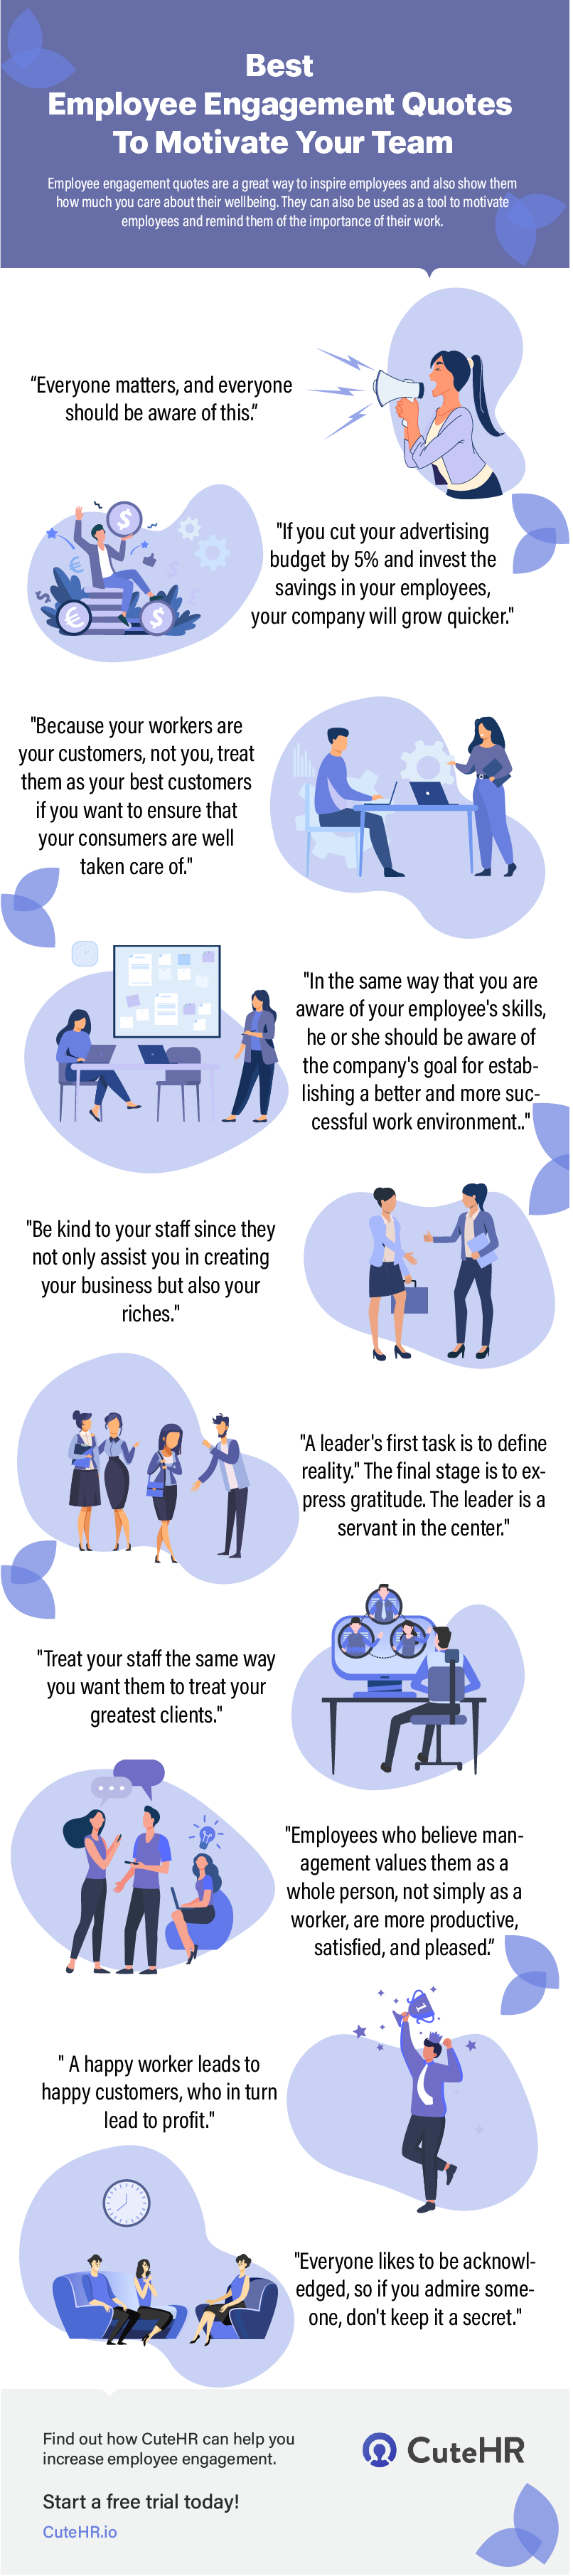 Employee Engagement Quotes